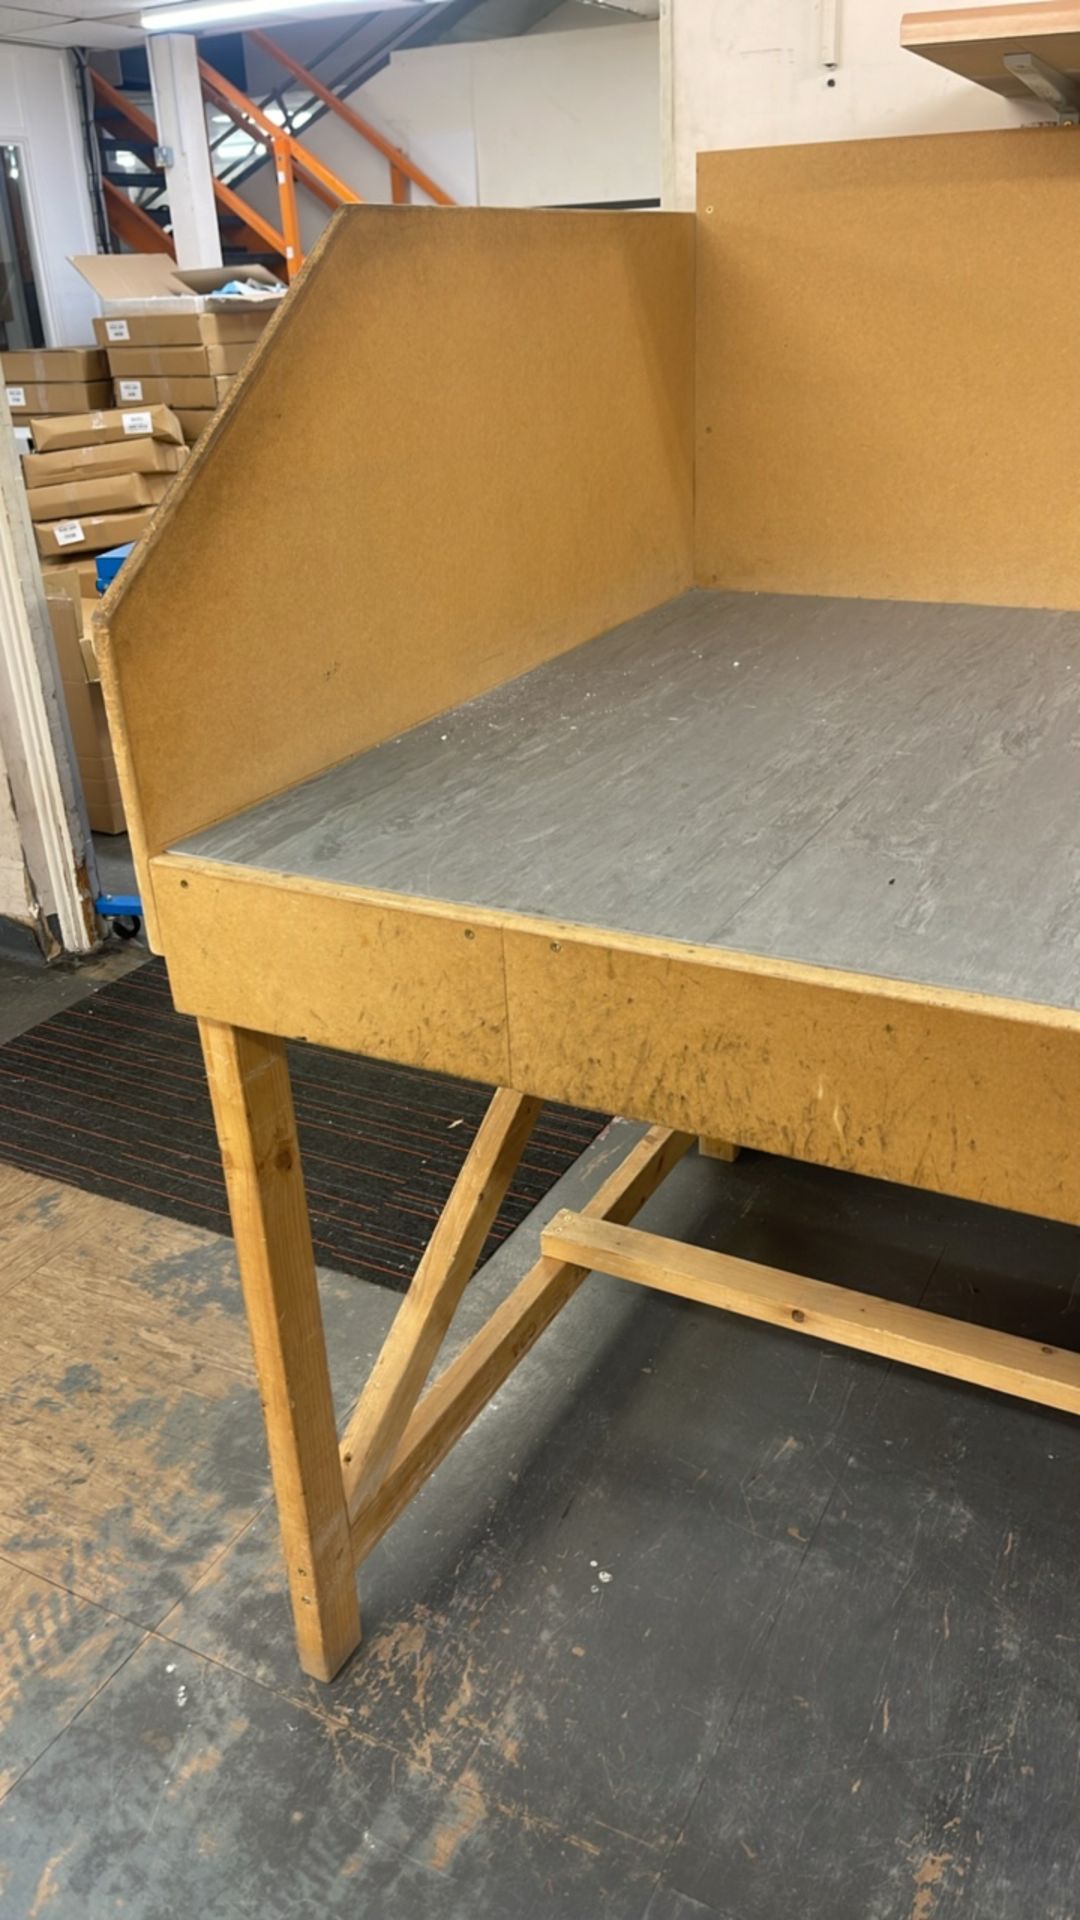 Wooden Work Bench Area - Image 4 of 9